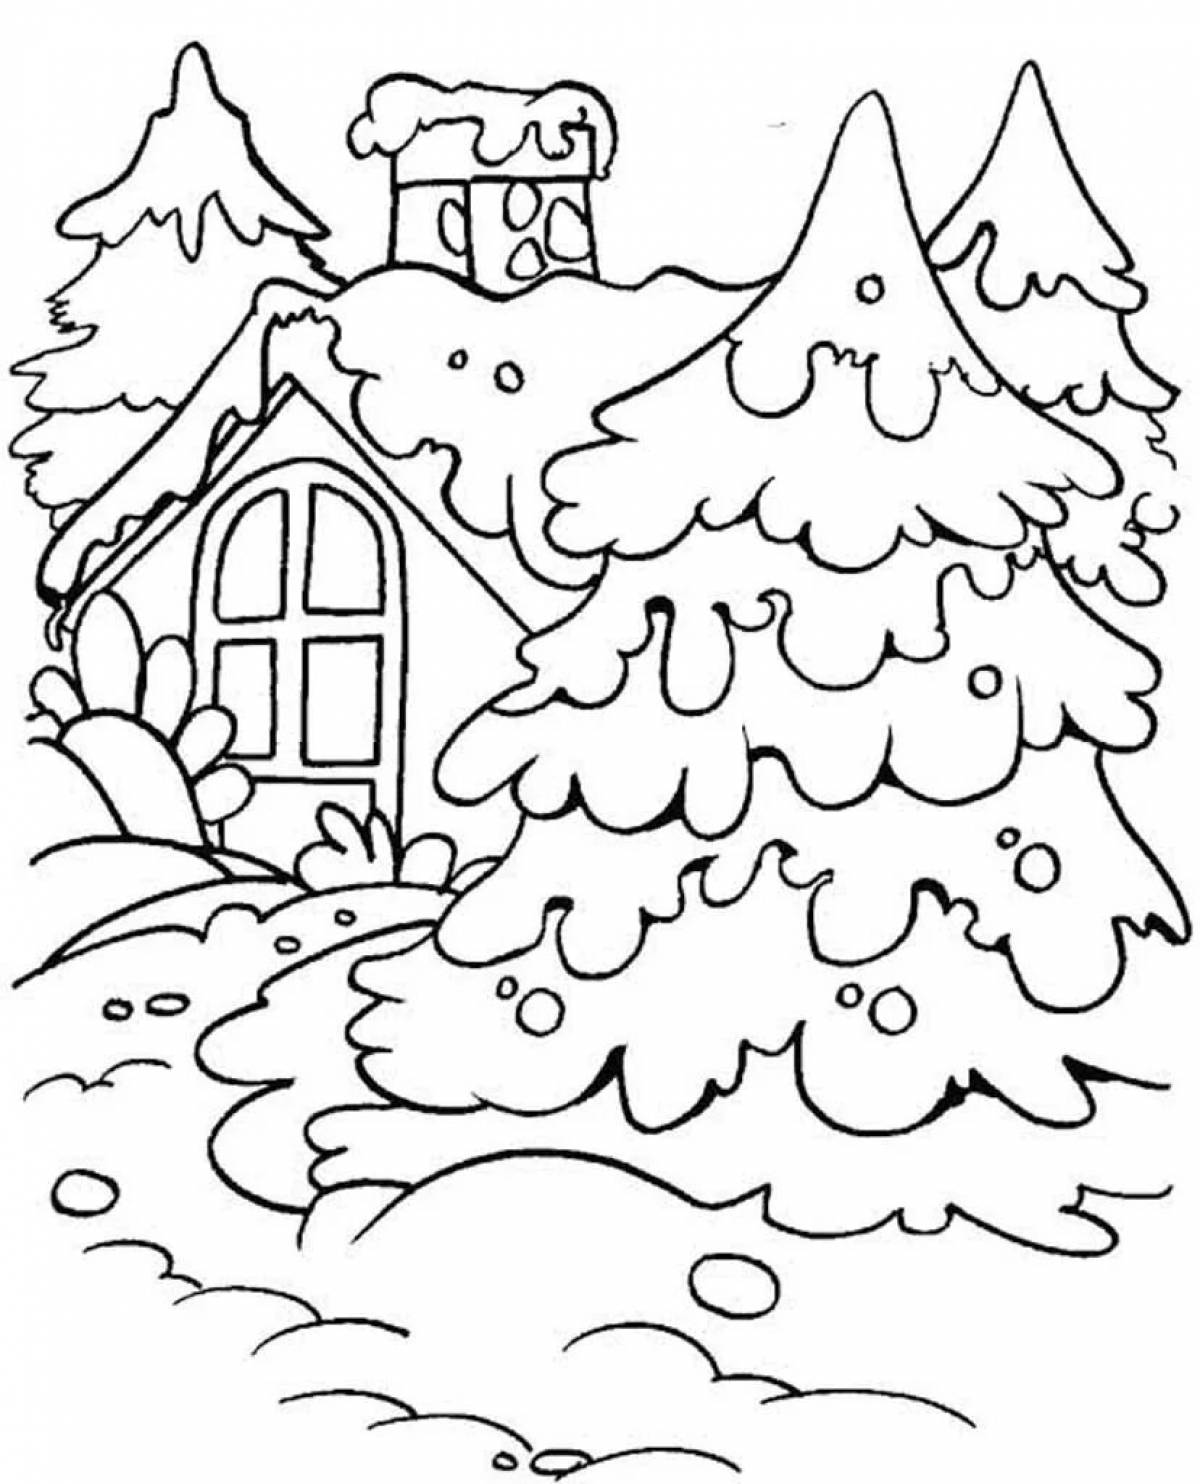 Blissful winter forest coloring book for children 6-7 years old